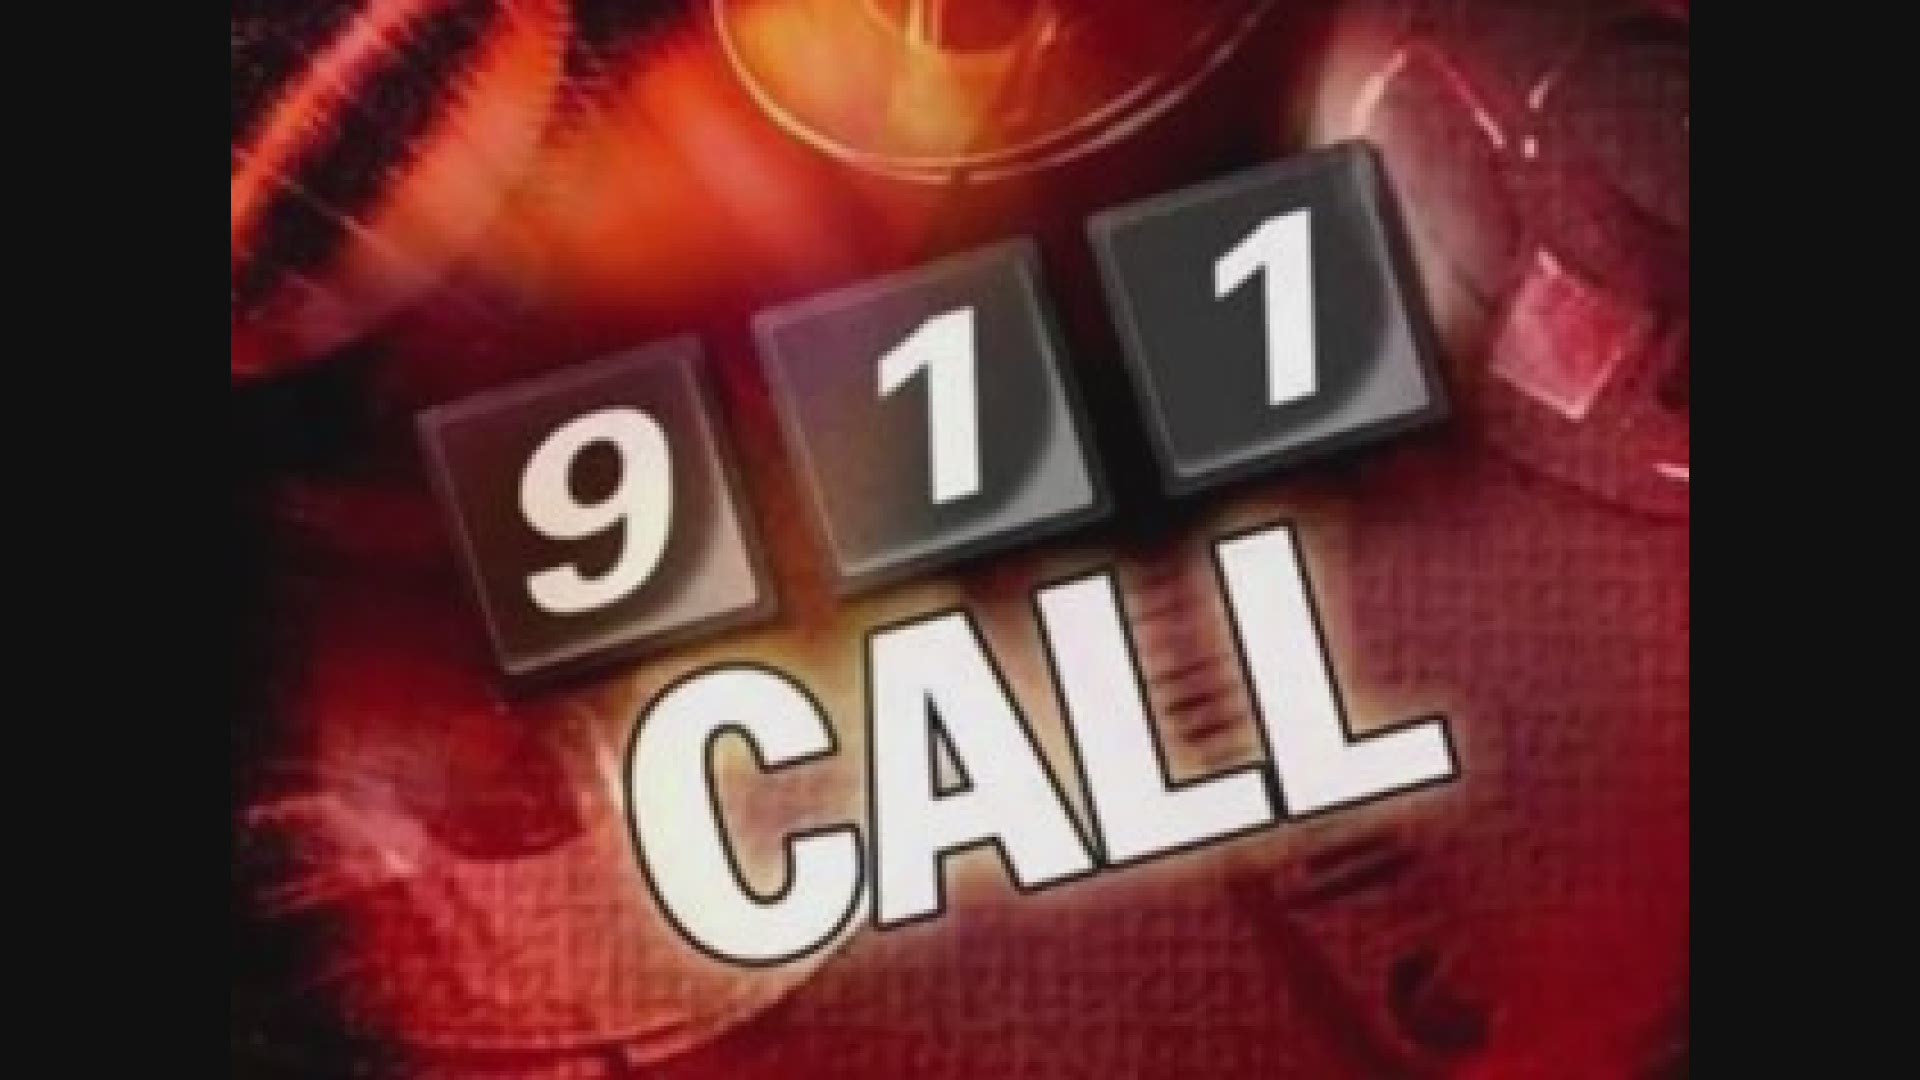 911 calls to Lakewood dispatch about ATVs and dirt bikes driving recklessly